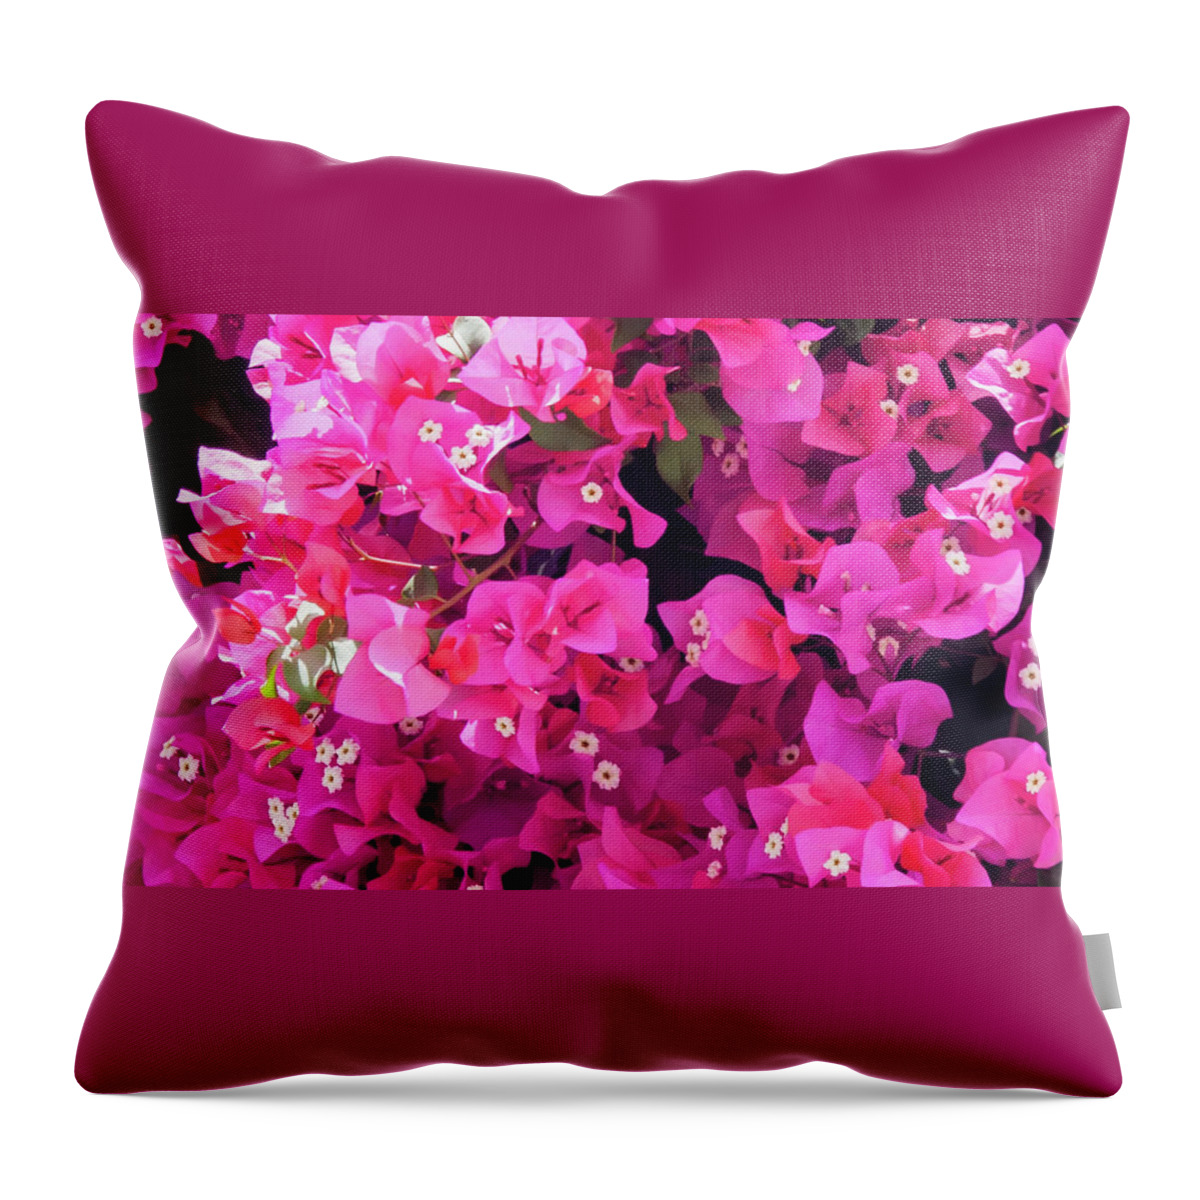 Andalucia Throw Pillow featuring the photograph Bougainvillea by Geoff Smith